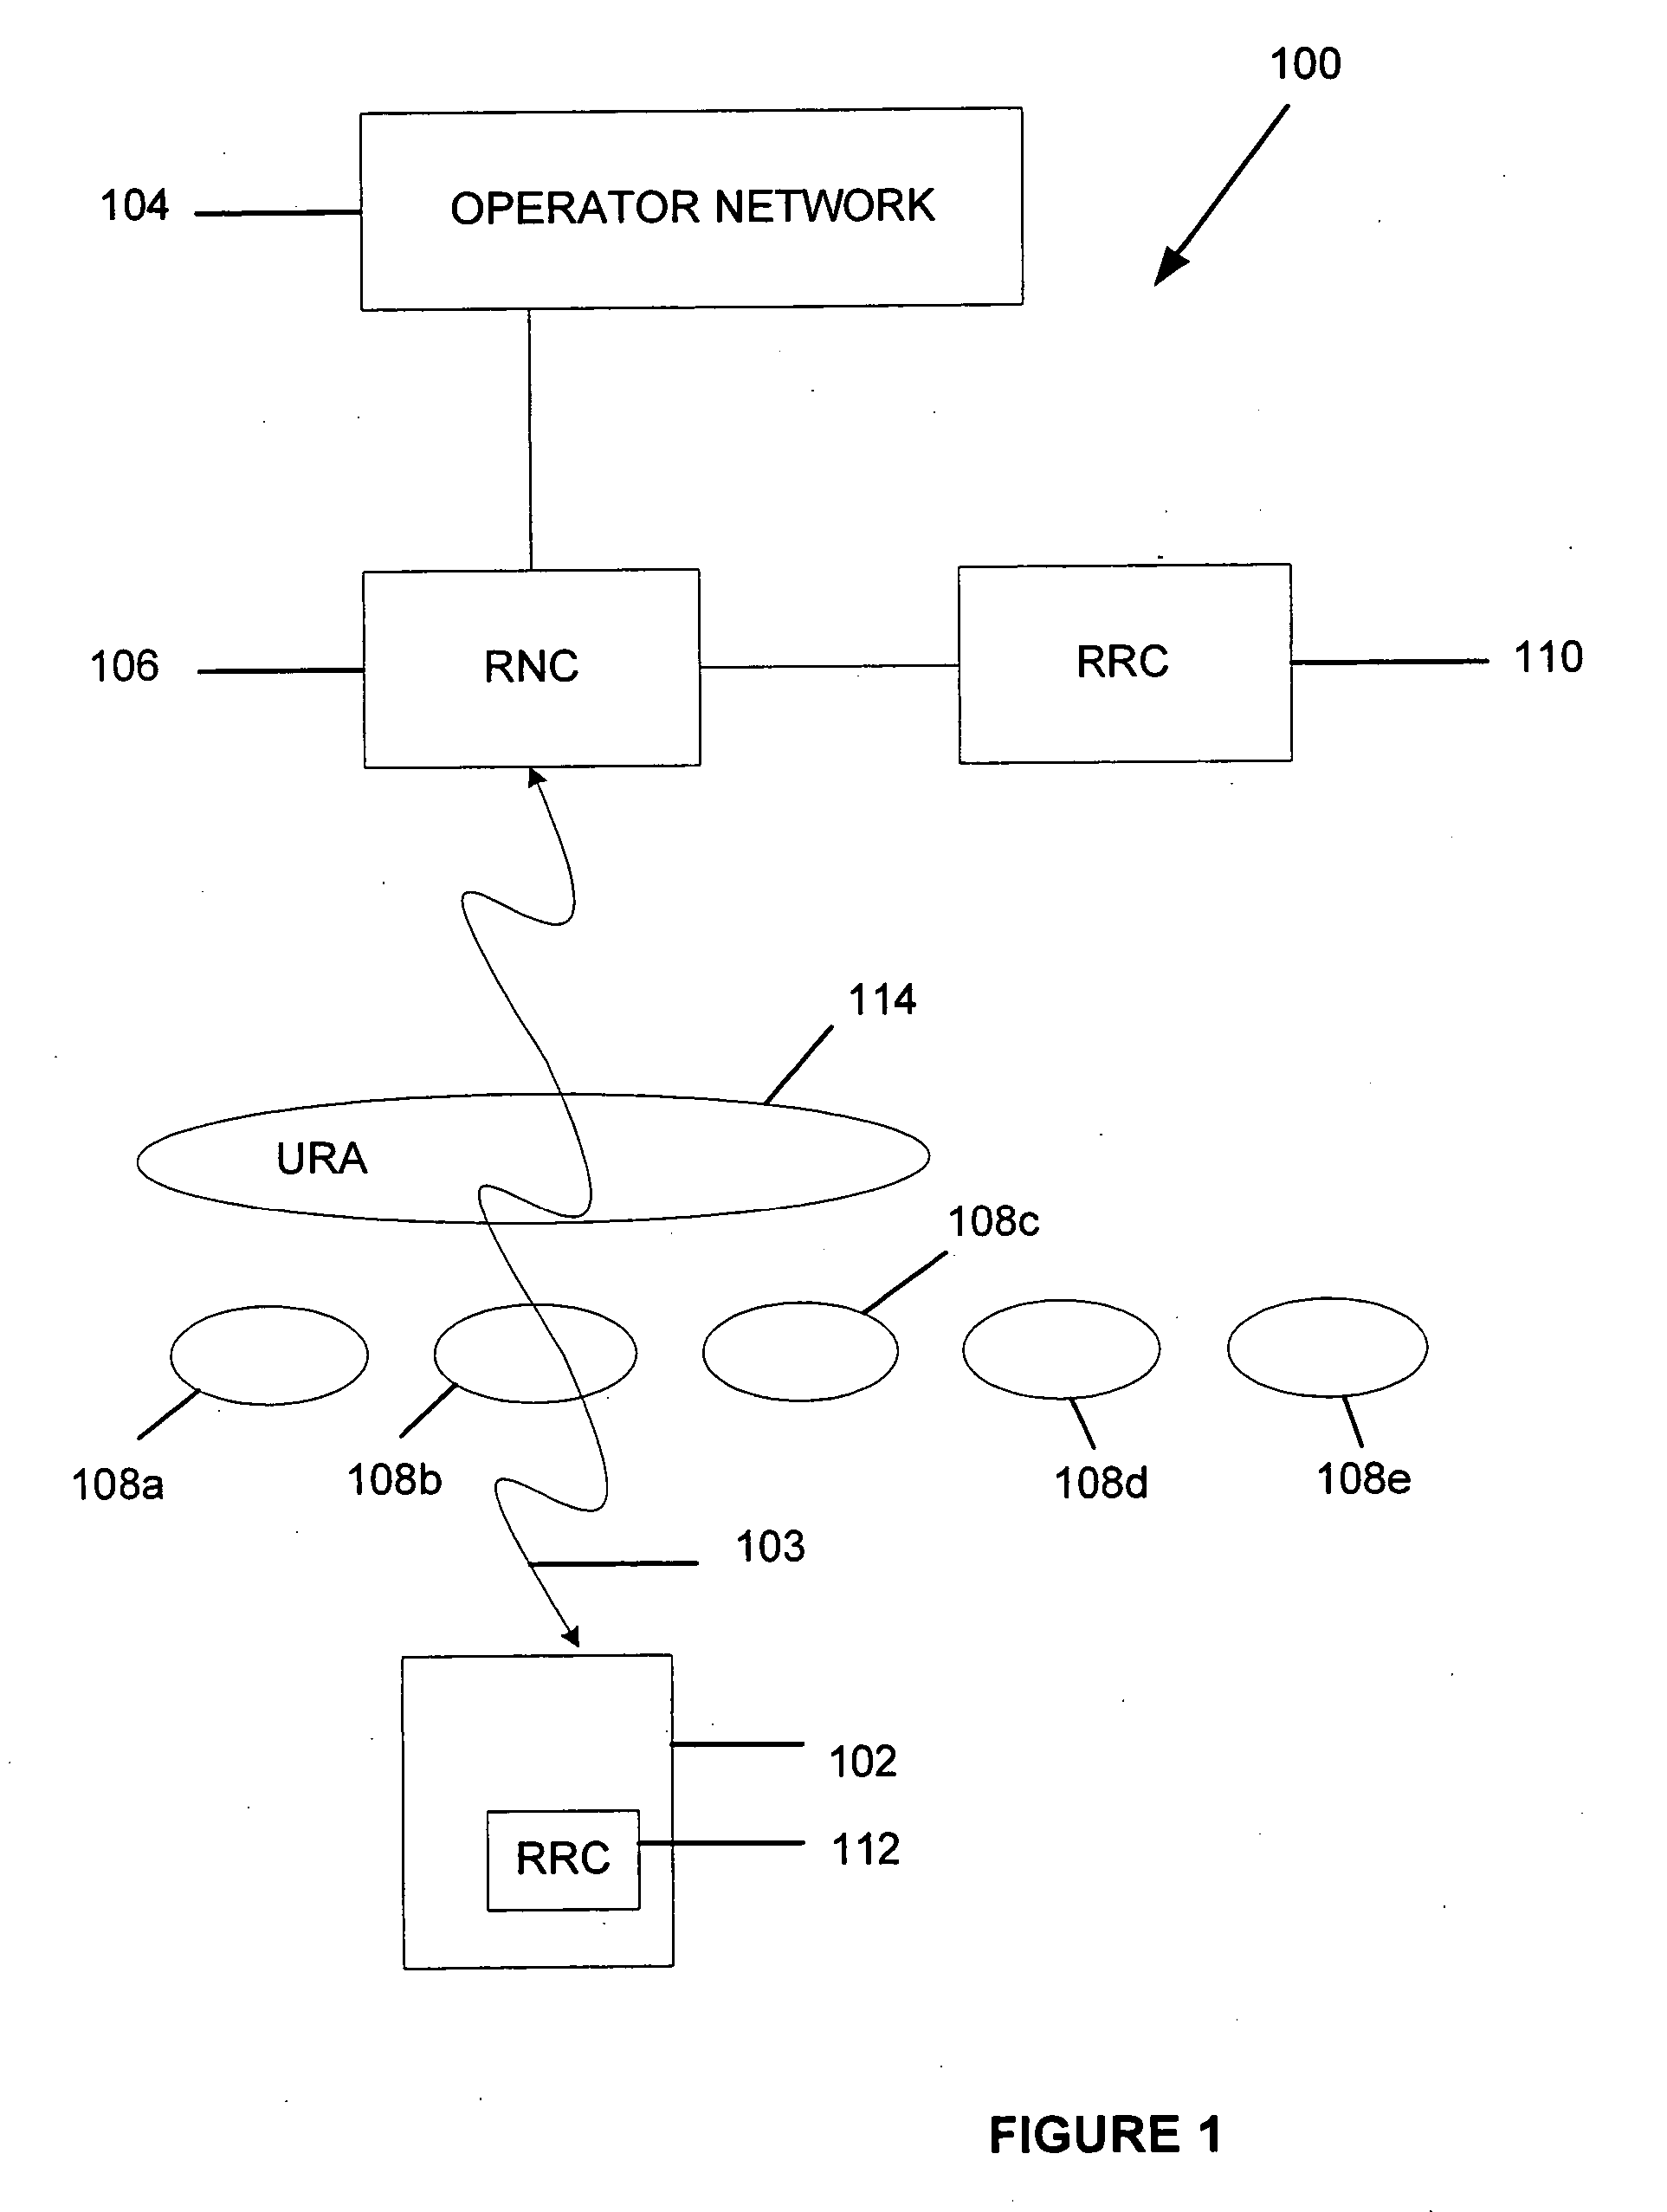 Method for maintaining transparent mode radio bearers in a radio access network